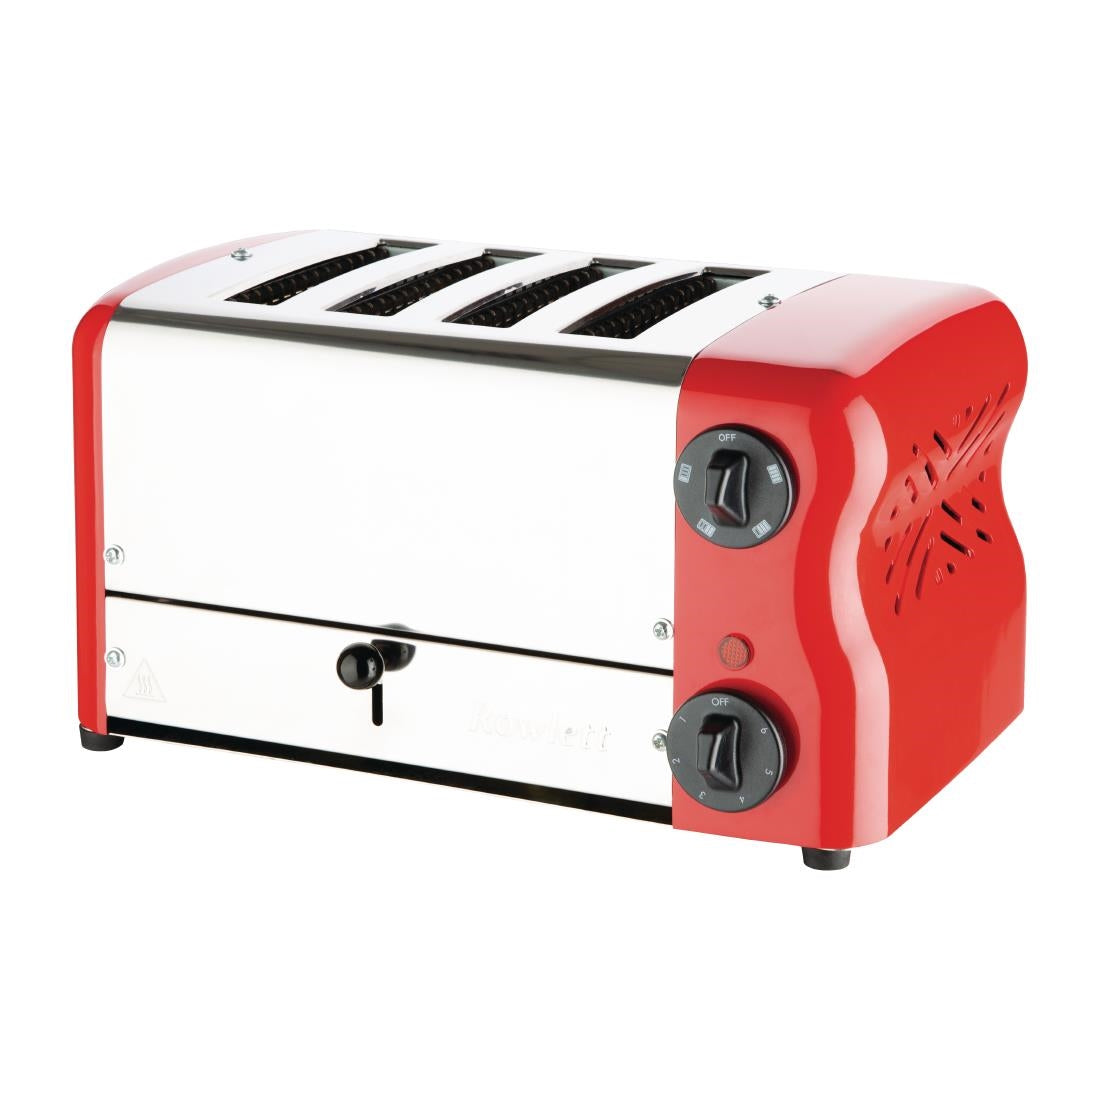 CH184 Rowlett Esprit 4 Slot Toaster Traffic Red w/2x Additional Elements & Sandwich Cage JD Catering Equipment Solutions Ltd